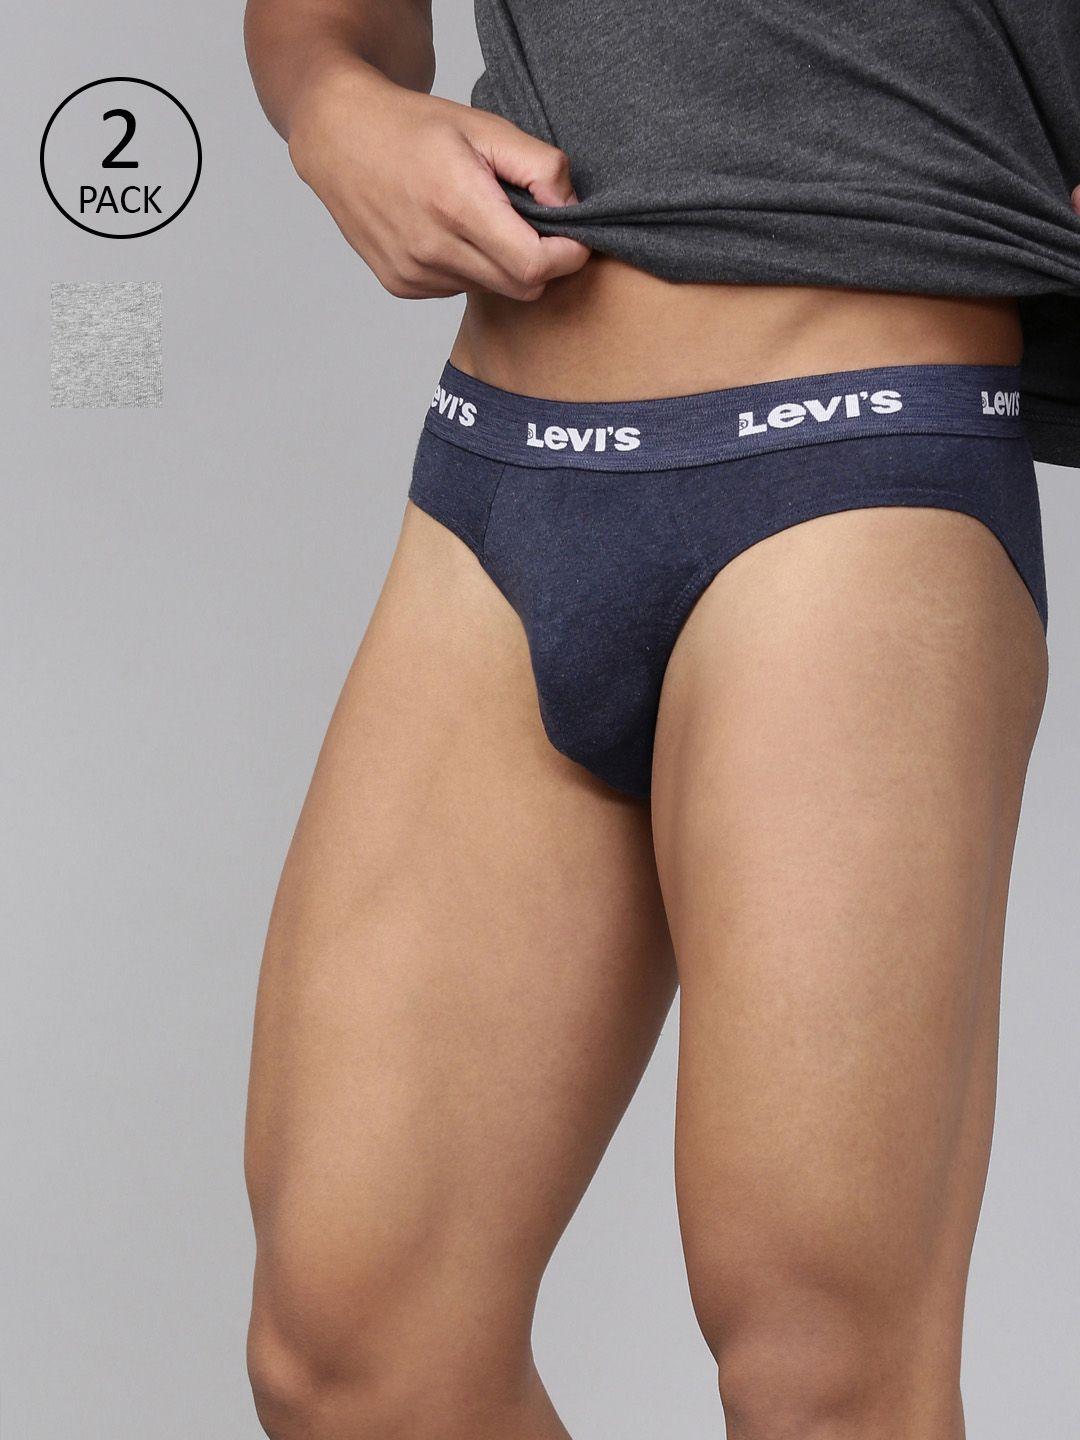 levis pack of 2 smartskin technology neo briefs with tag free comfort #009